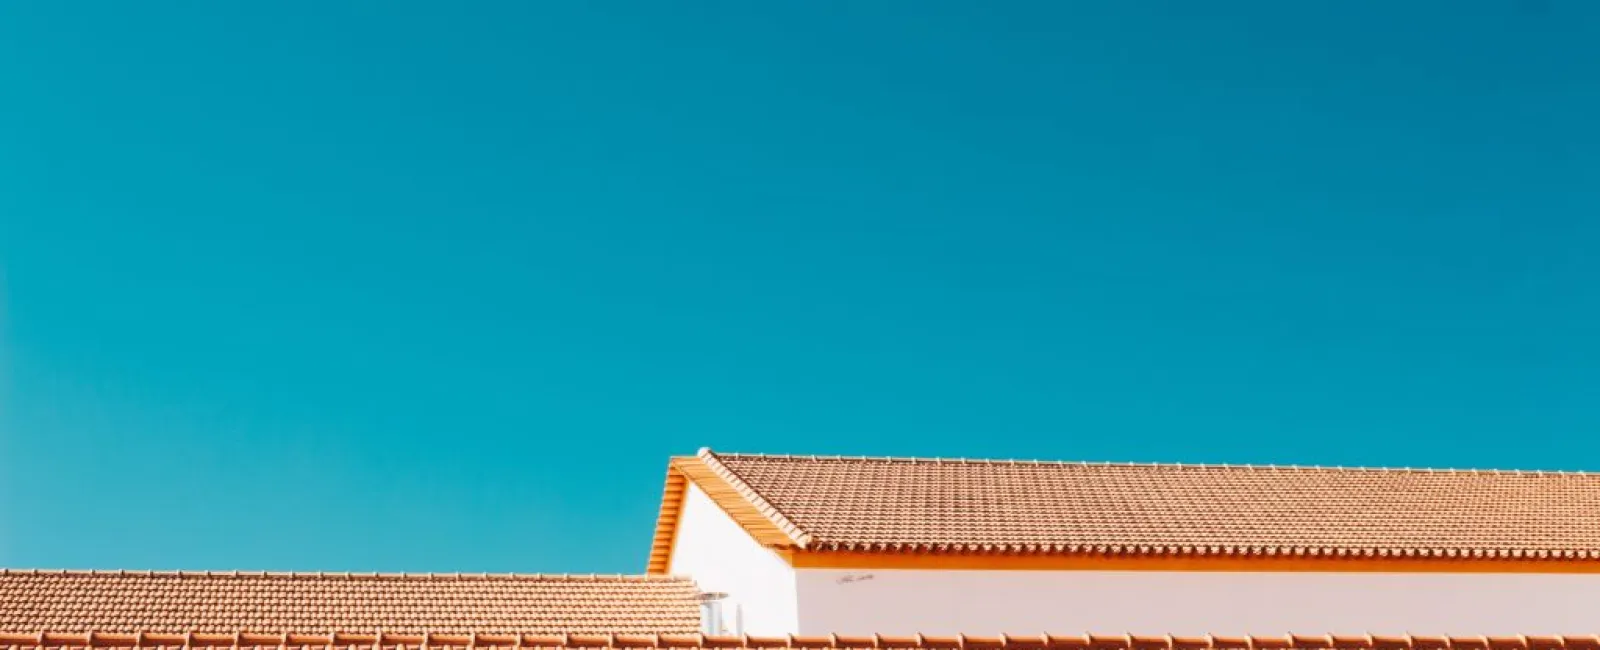 Property Managers Need These Commercial Roofing Tips